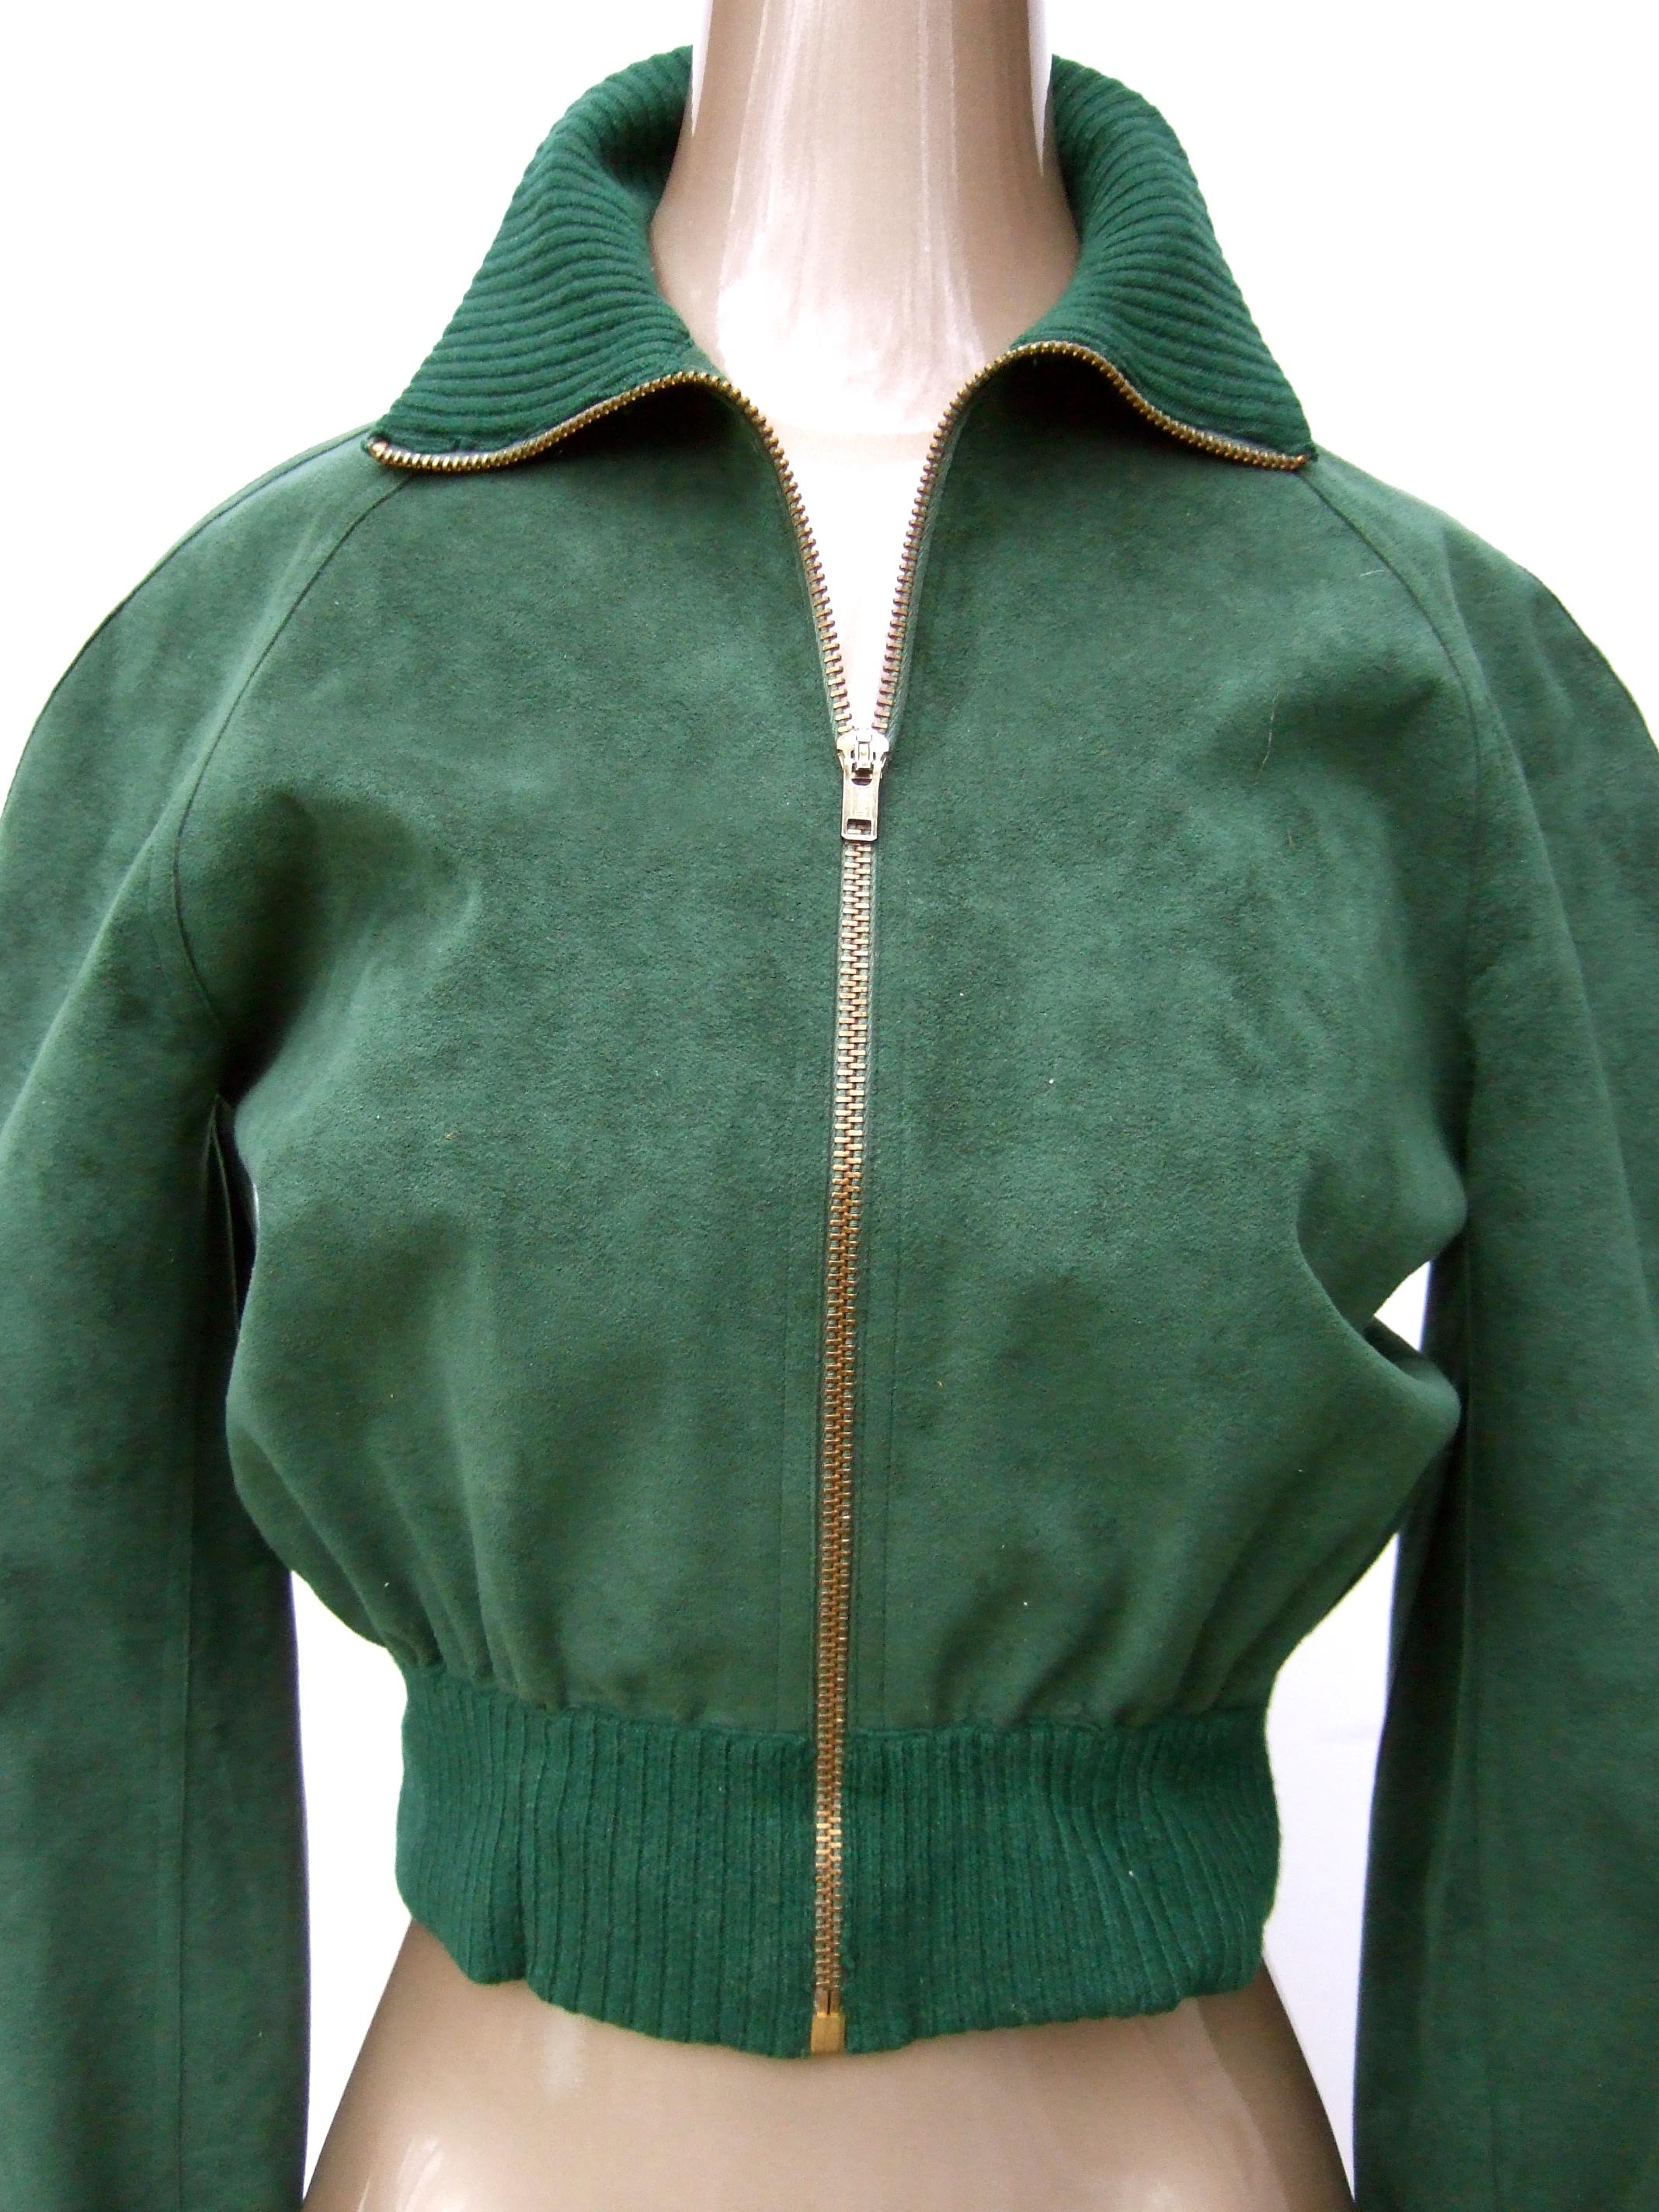 Women's Halston Iconic Ultra Feather Faux Suede Cropped Zippered Jacket c 1970s Petite  For Sale